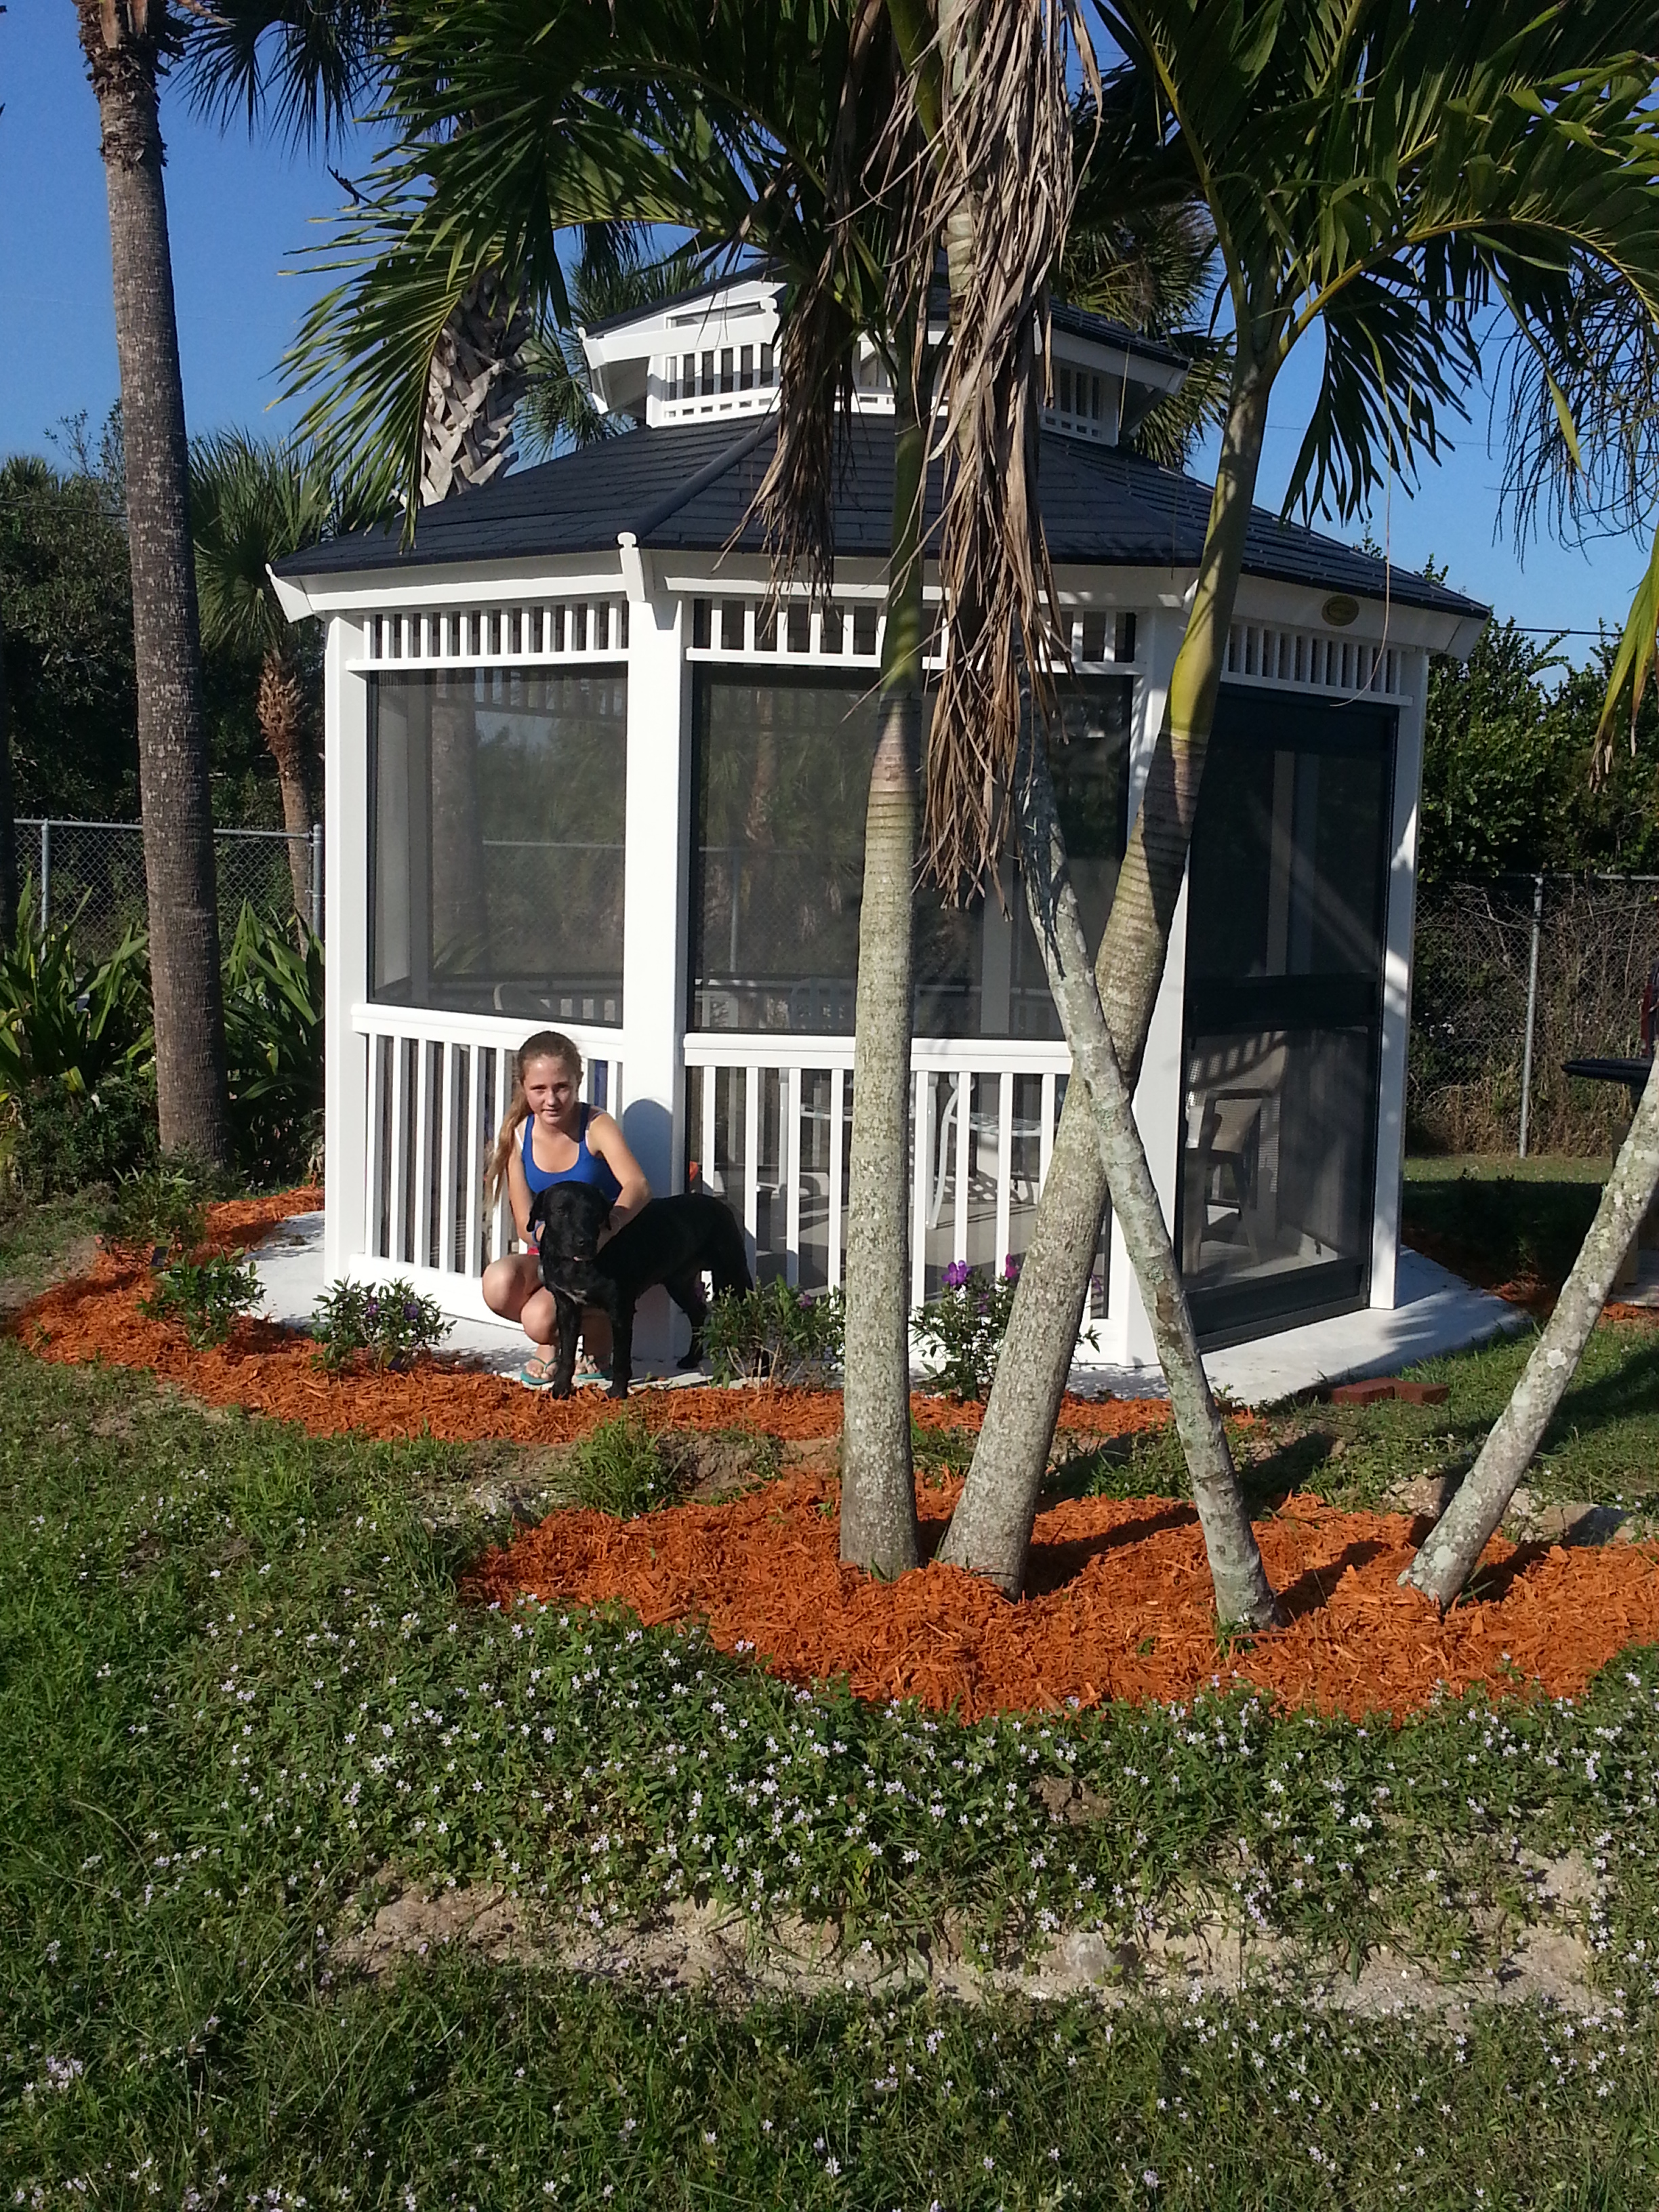 Amber raised $4400 for BDRR to have a Gazebo built on property April 2013